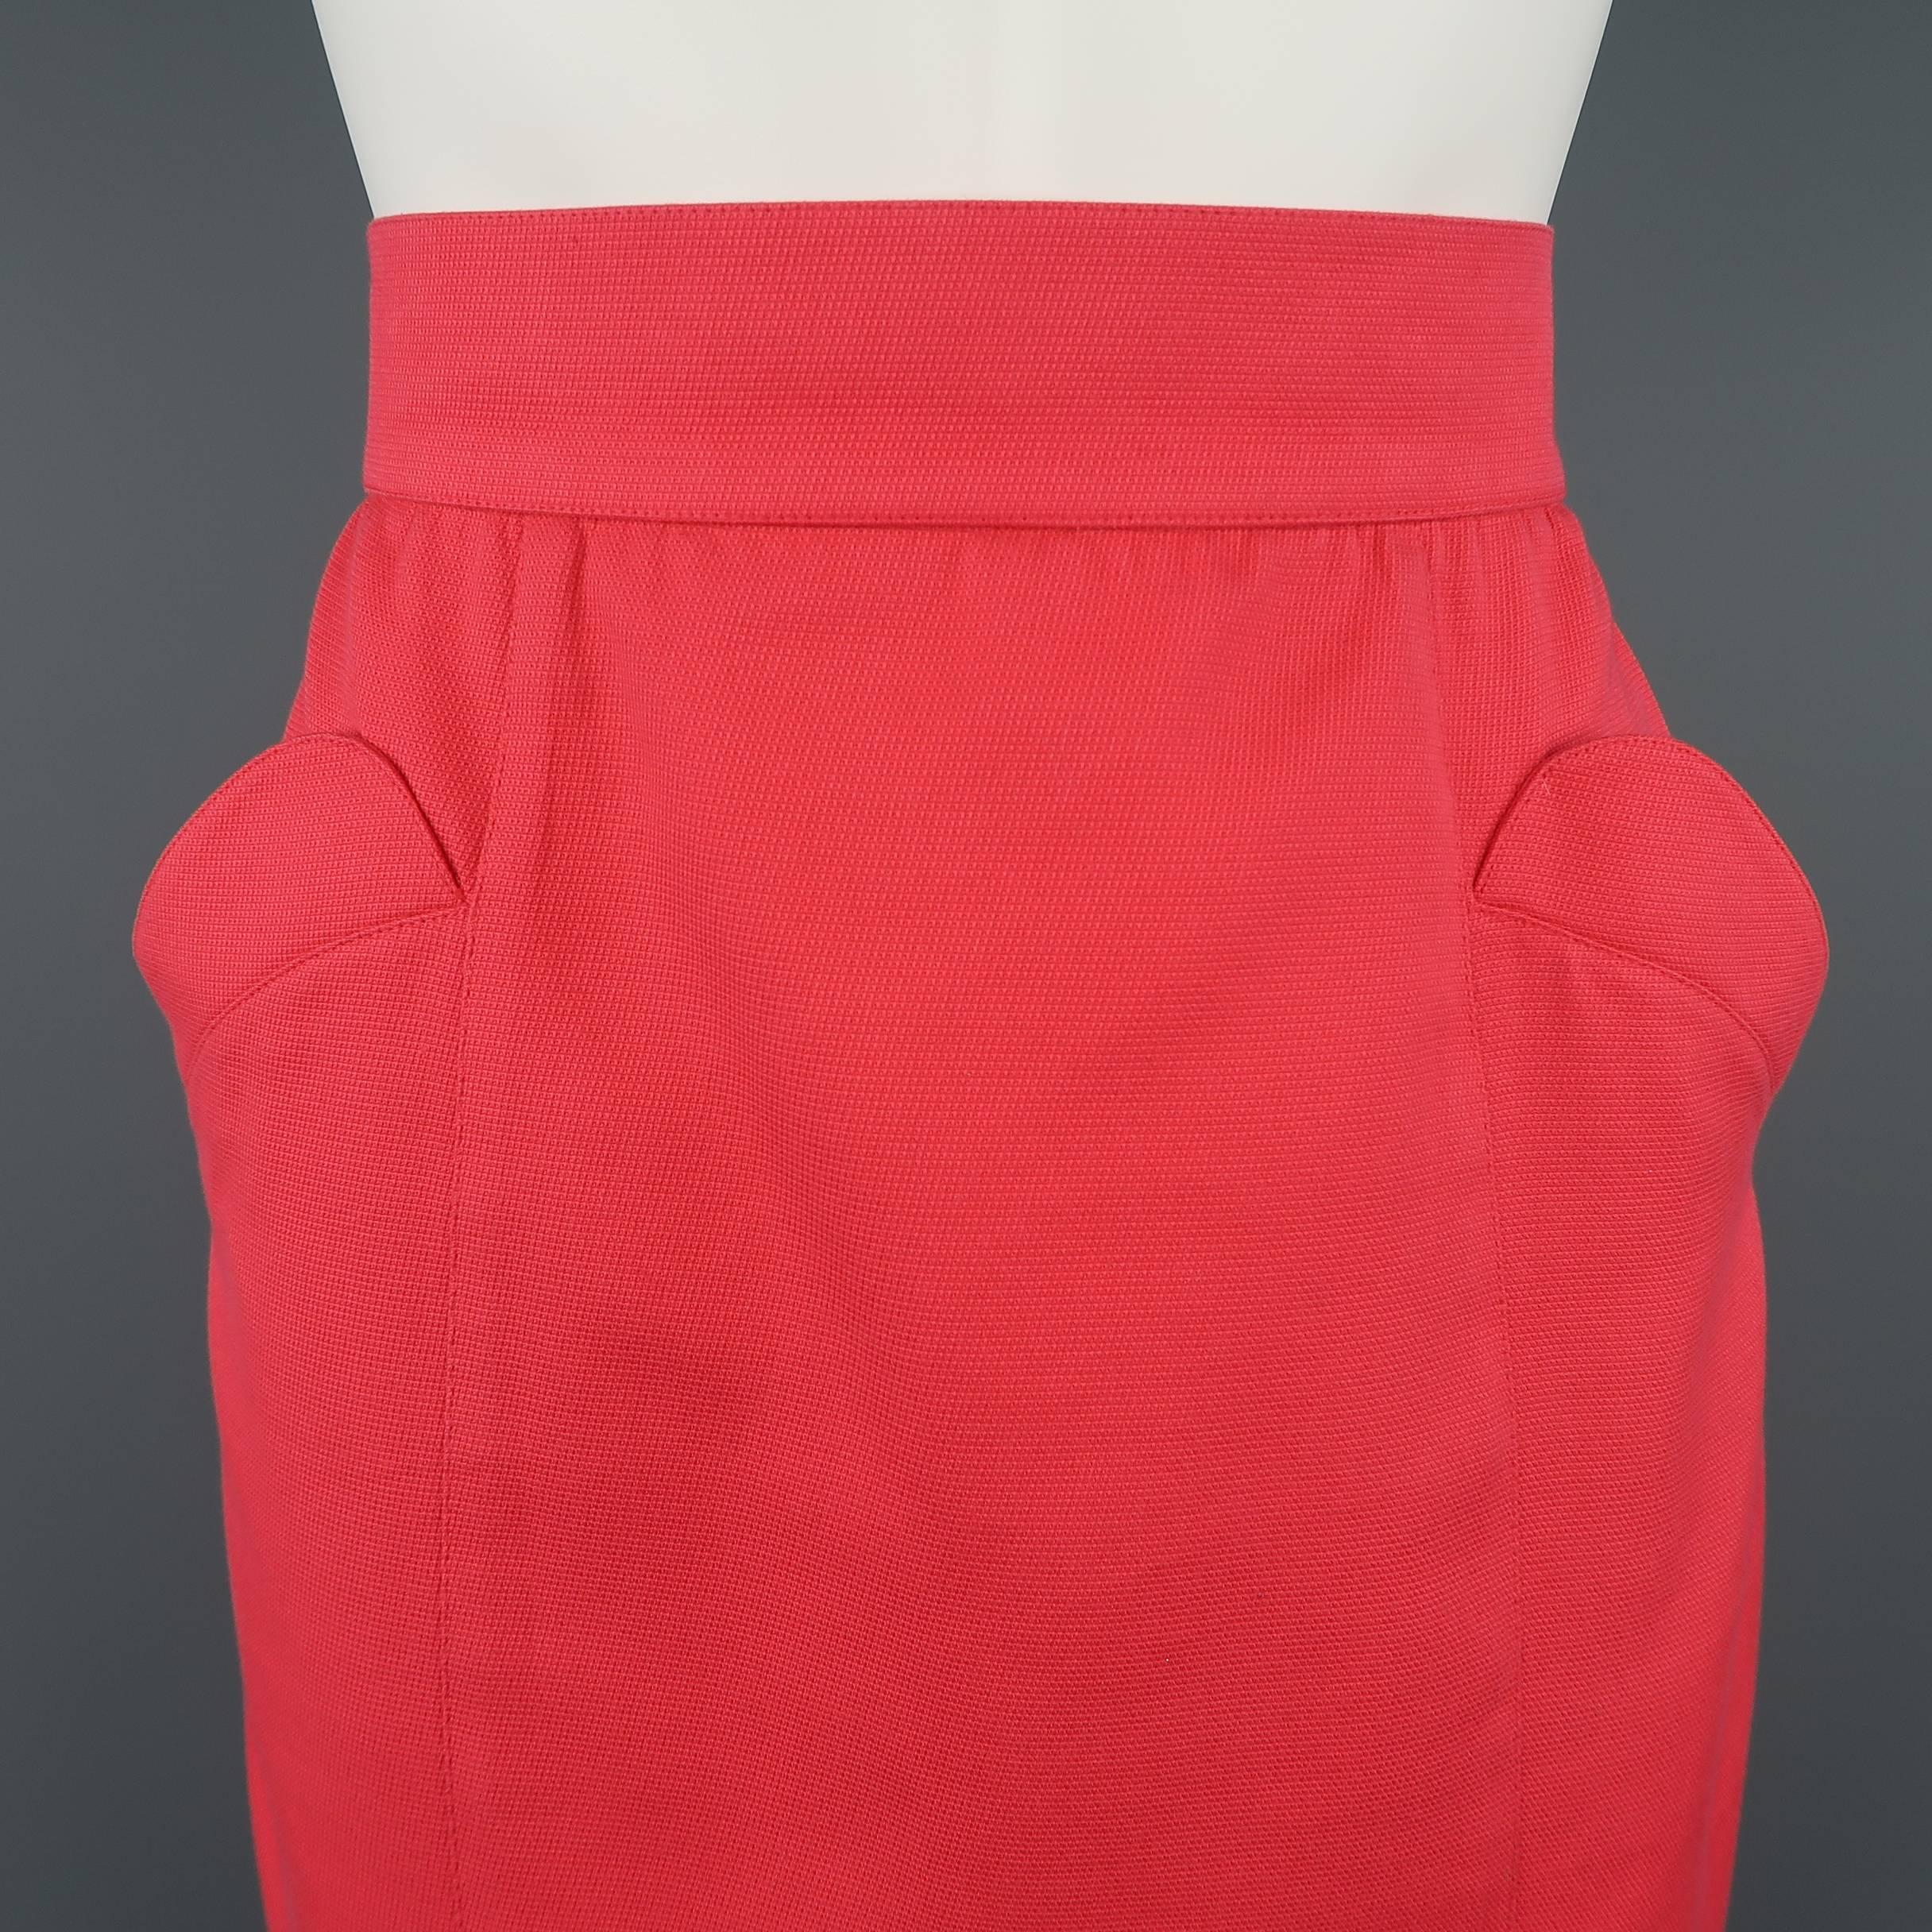 Vintage 1980's THIERY MUGLER pencil skirt comes in coral pink cotton canvas with graphic trimmed pockets, asymmetrical zip snap closure, and fishtail back. Made in France.
 
Fair Pre-Owned Condition.
Marked: FR 40
 
Measurements:
 
Waist: 27